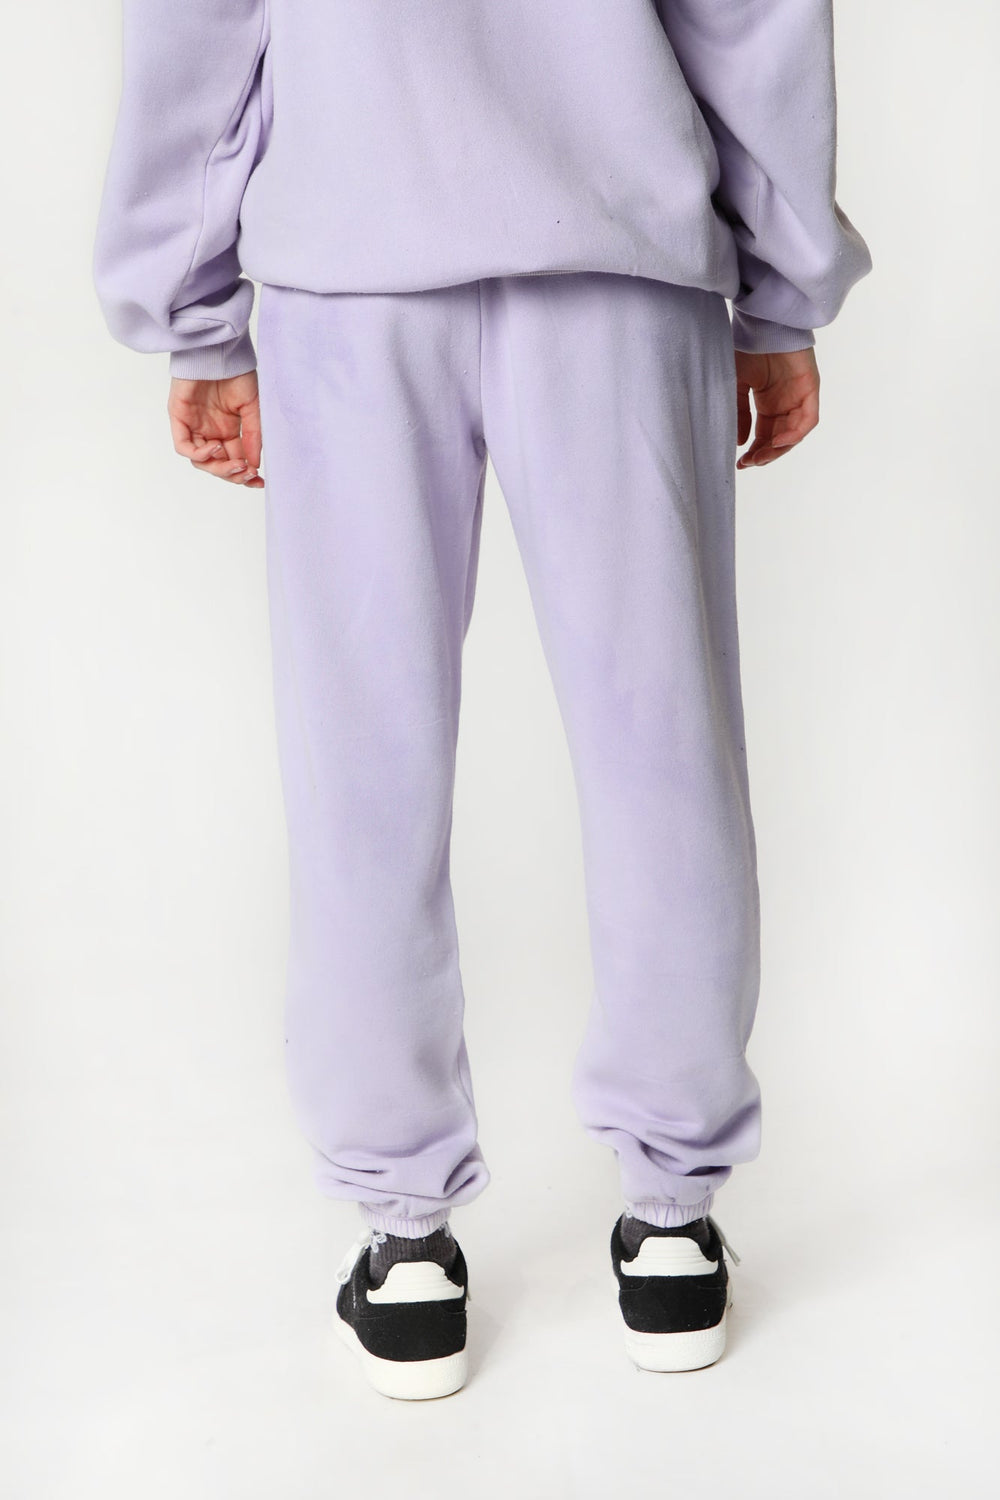 Womens Sovrn Voices Lilac Graphic Sweatpant Womens Sovrn Voices Lilac Graphic Sweatpant